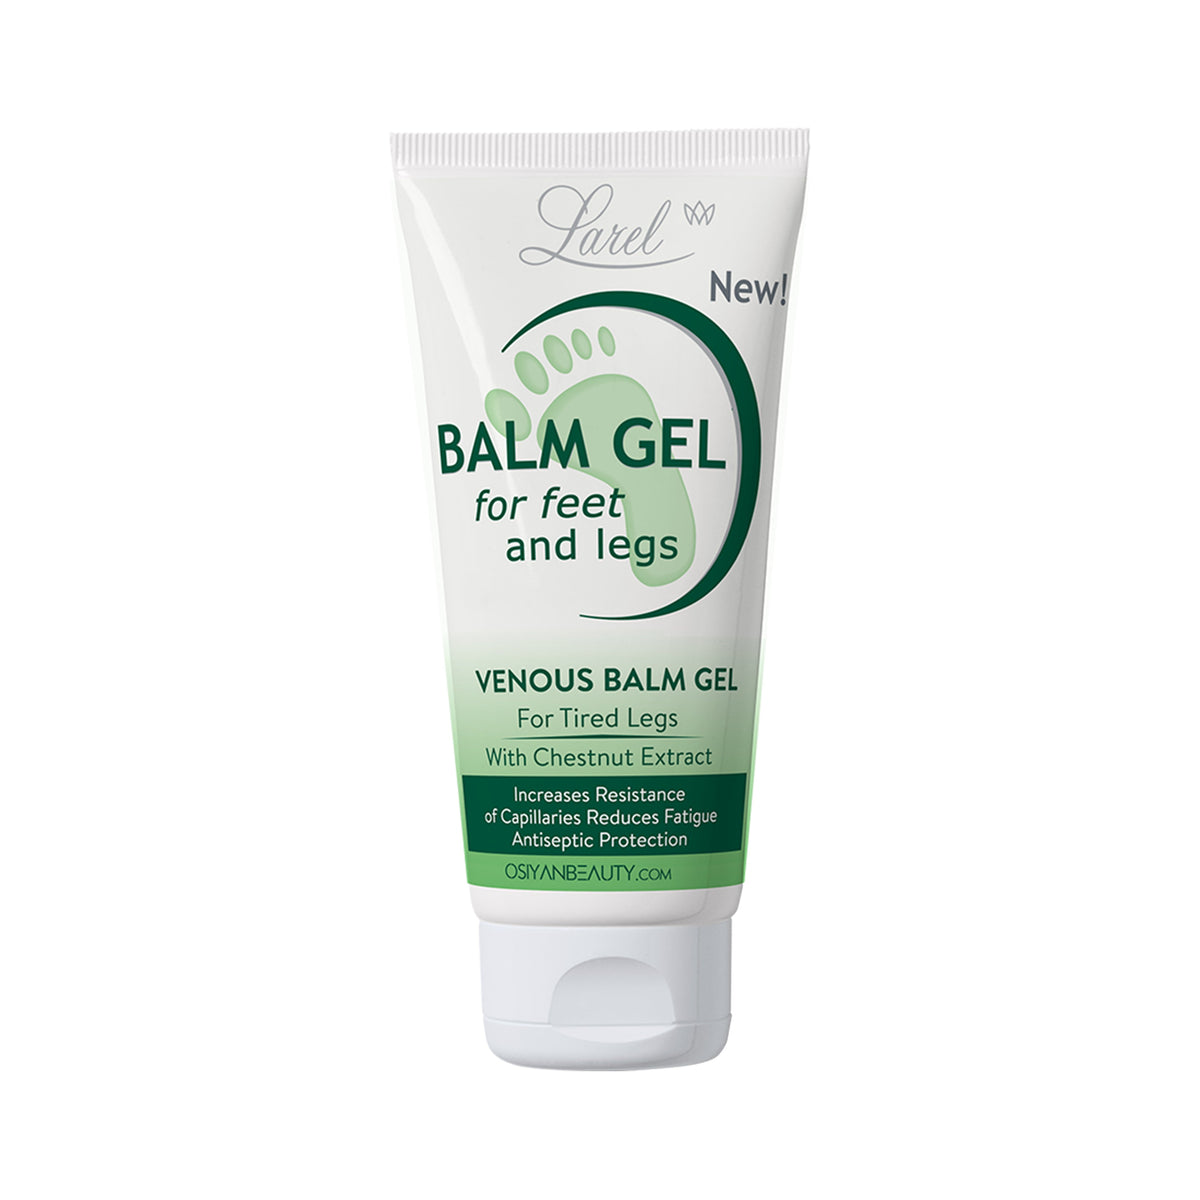 Legs Light balm-Gel For Weary feet with chestnut extract(Made in Europe)